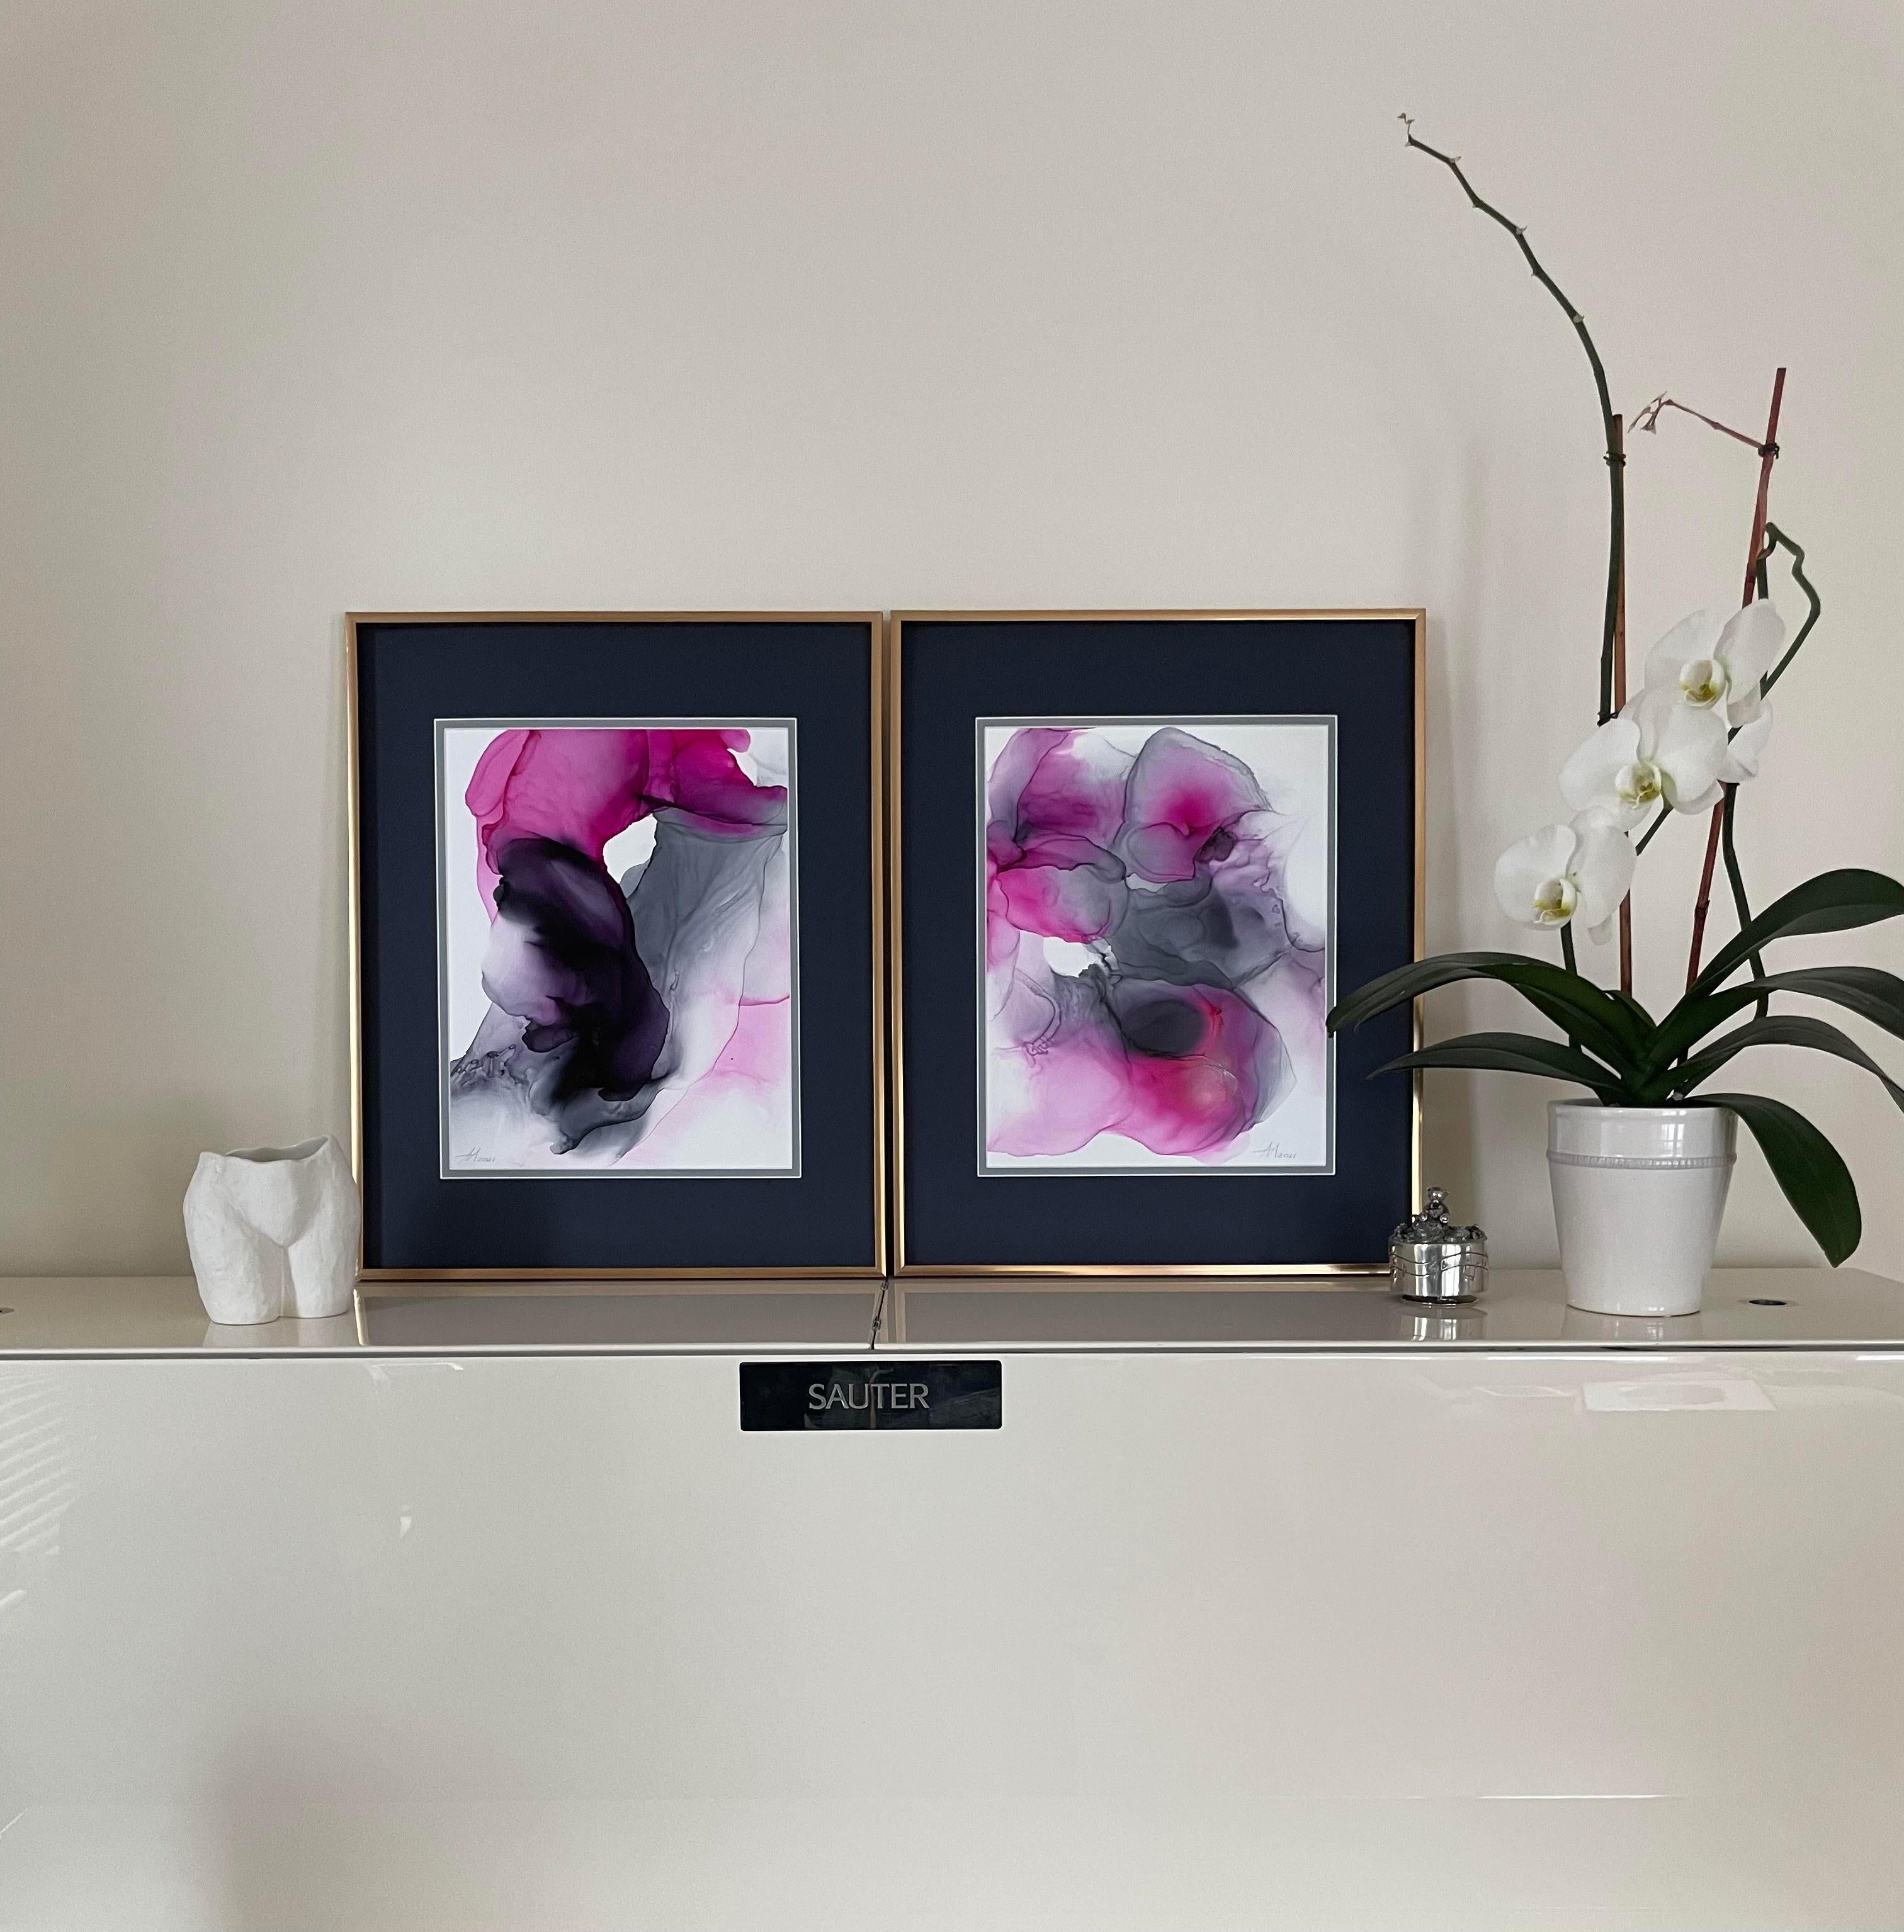 The garden of delights - abstraction art, made in pink, purple, grey color  - Art by Mila Akopova